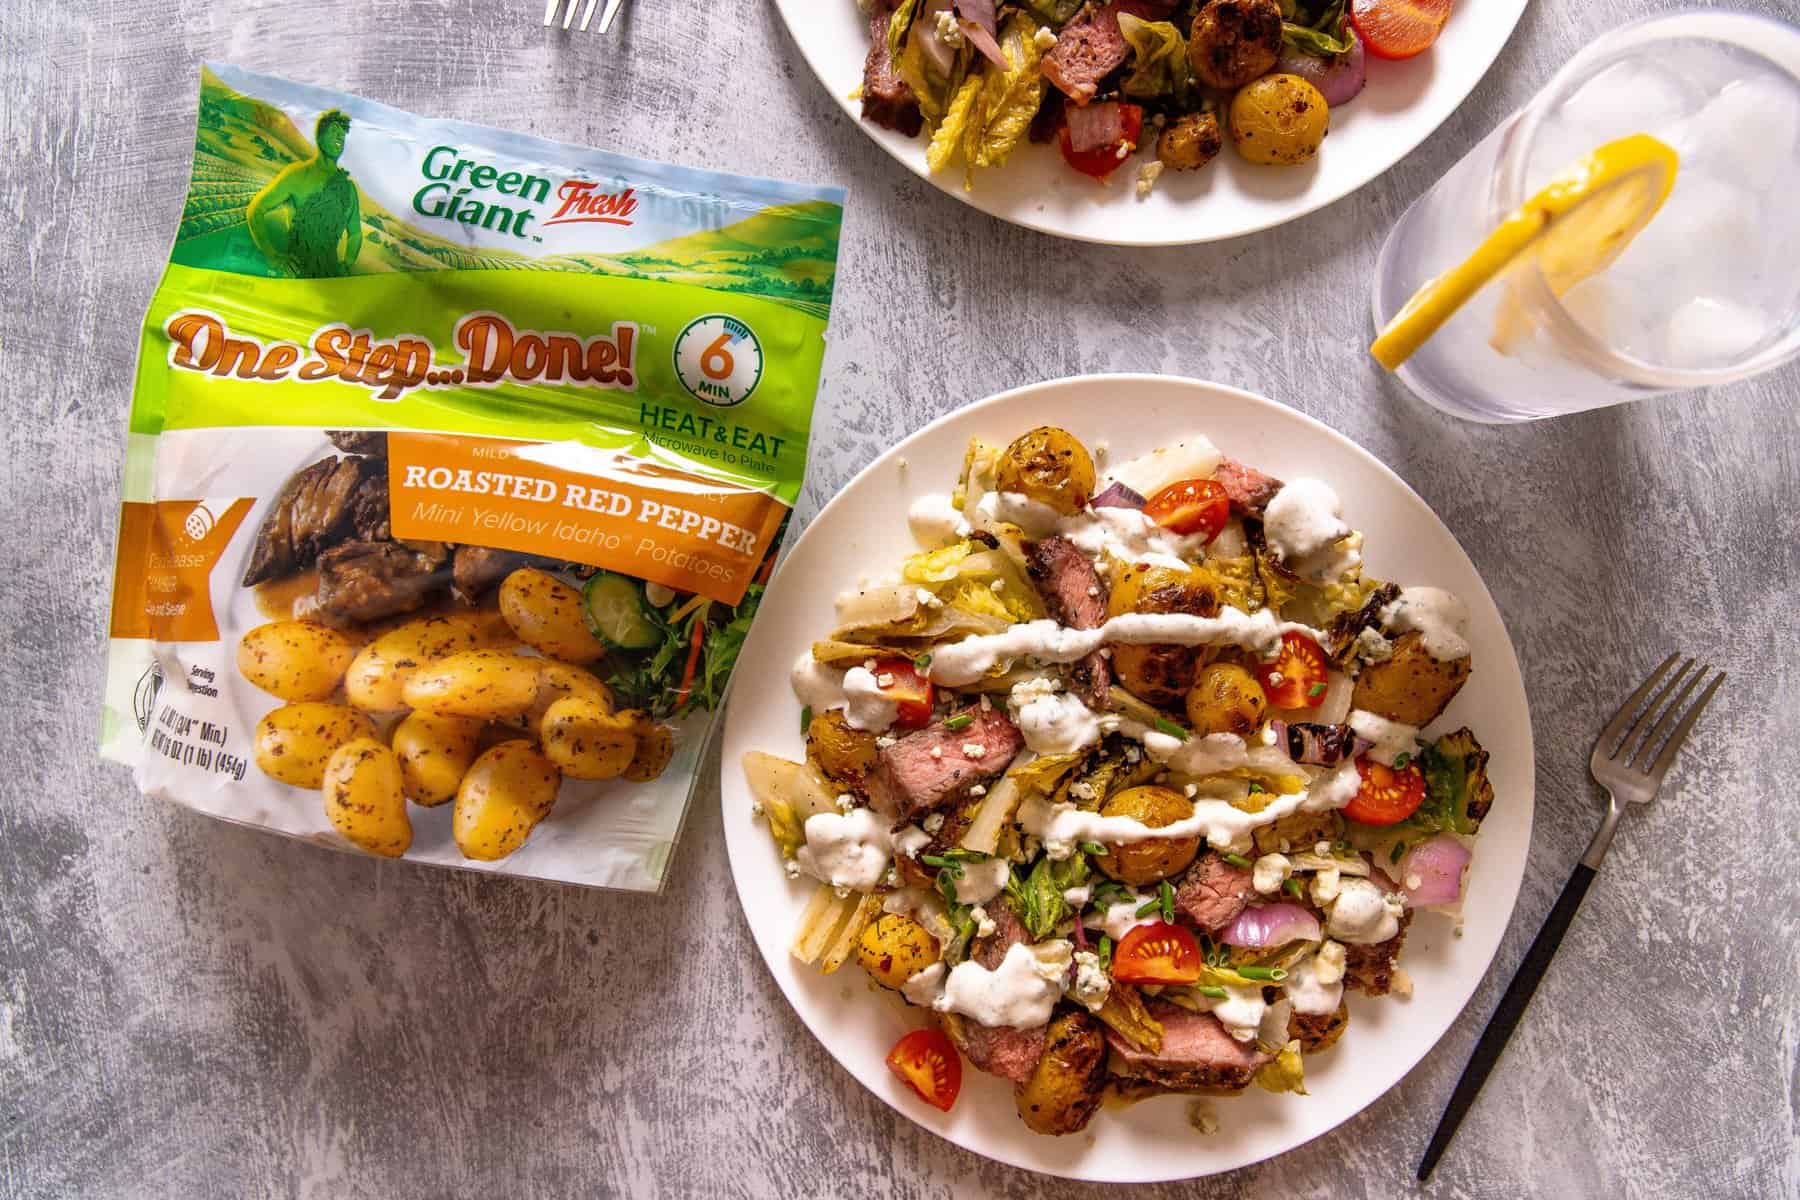 Grilled One Step...Done!™ Potatoes & Steak Salad by Farm Star Living